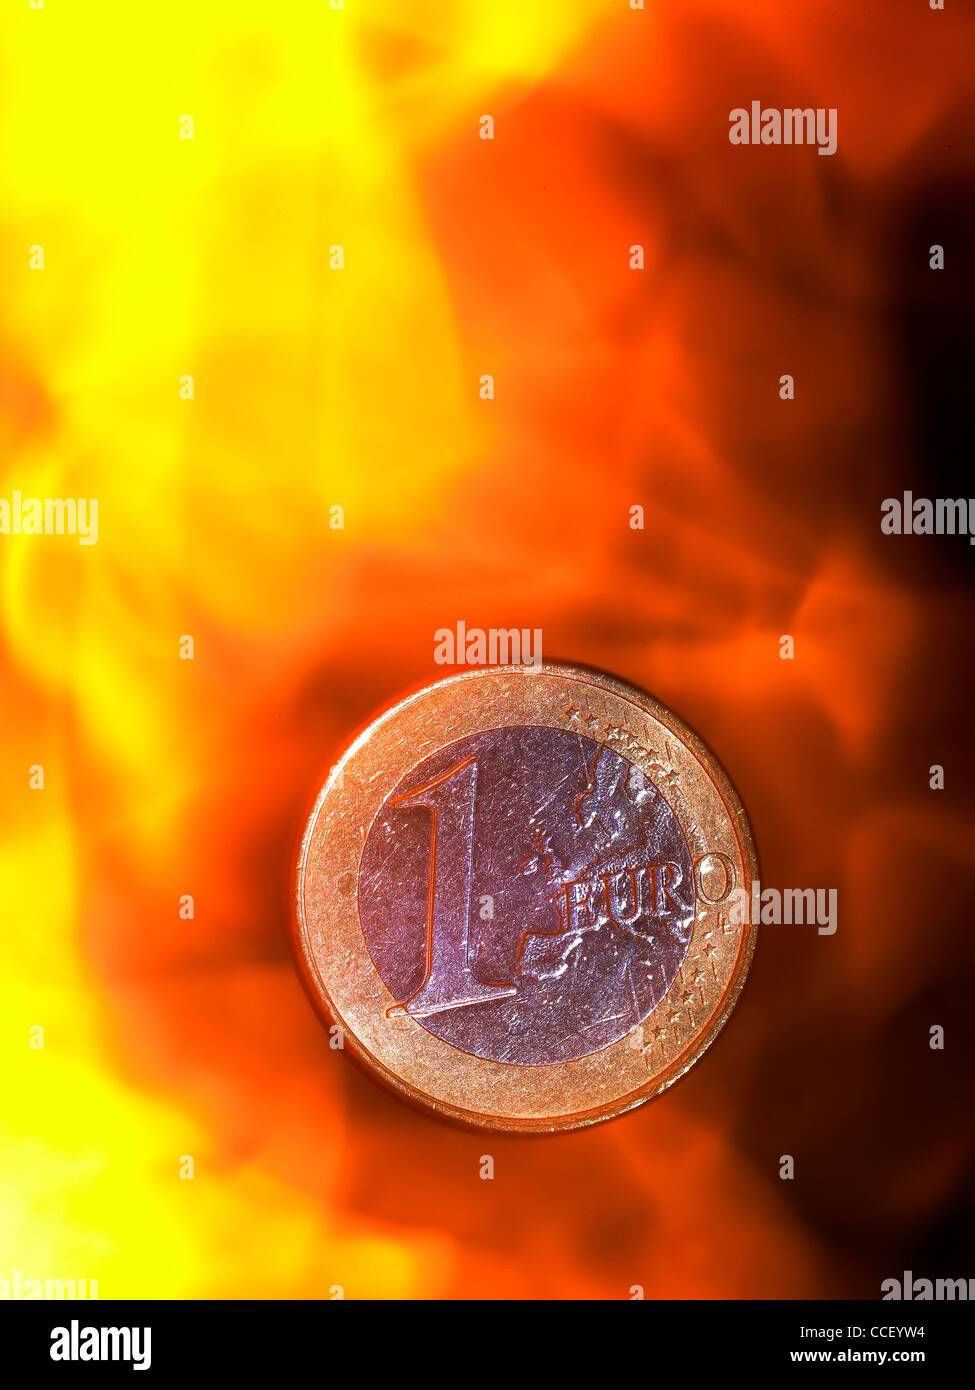 A one euro coin amongst flames Stock Photo